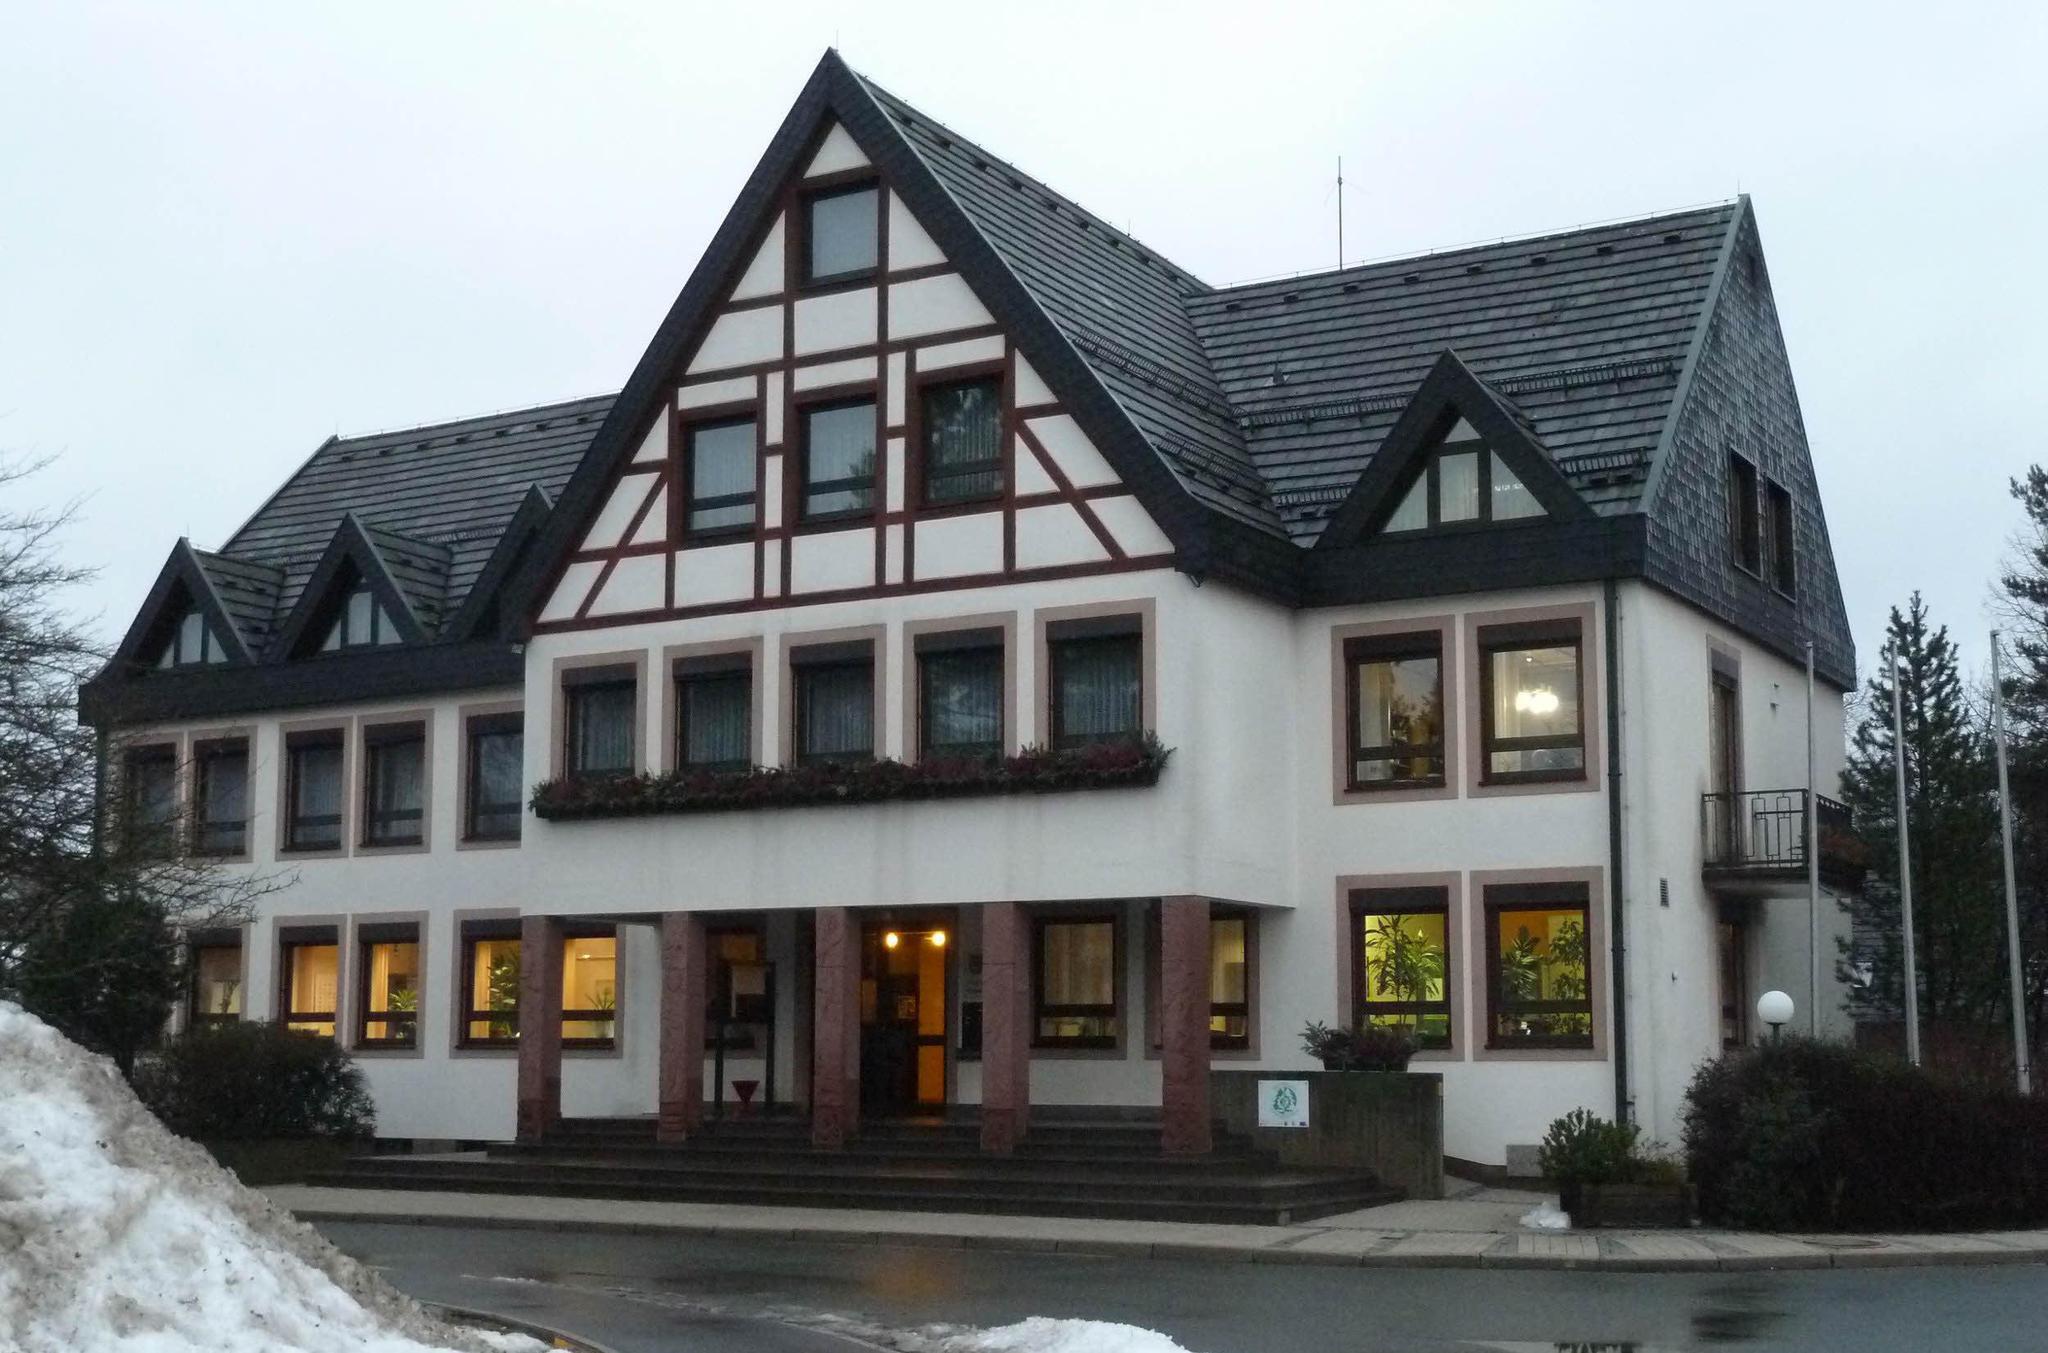 Stockheim town council decides on investments